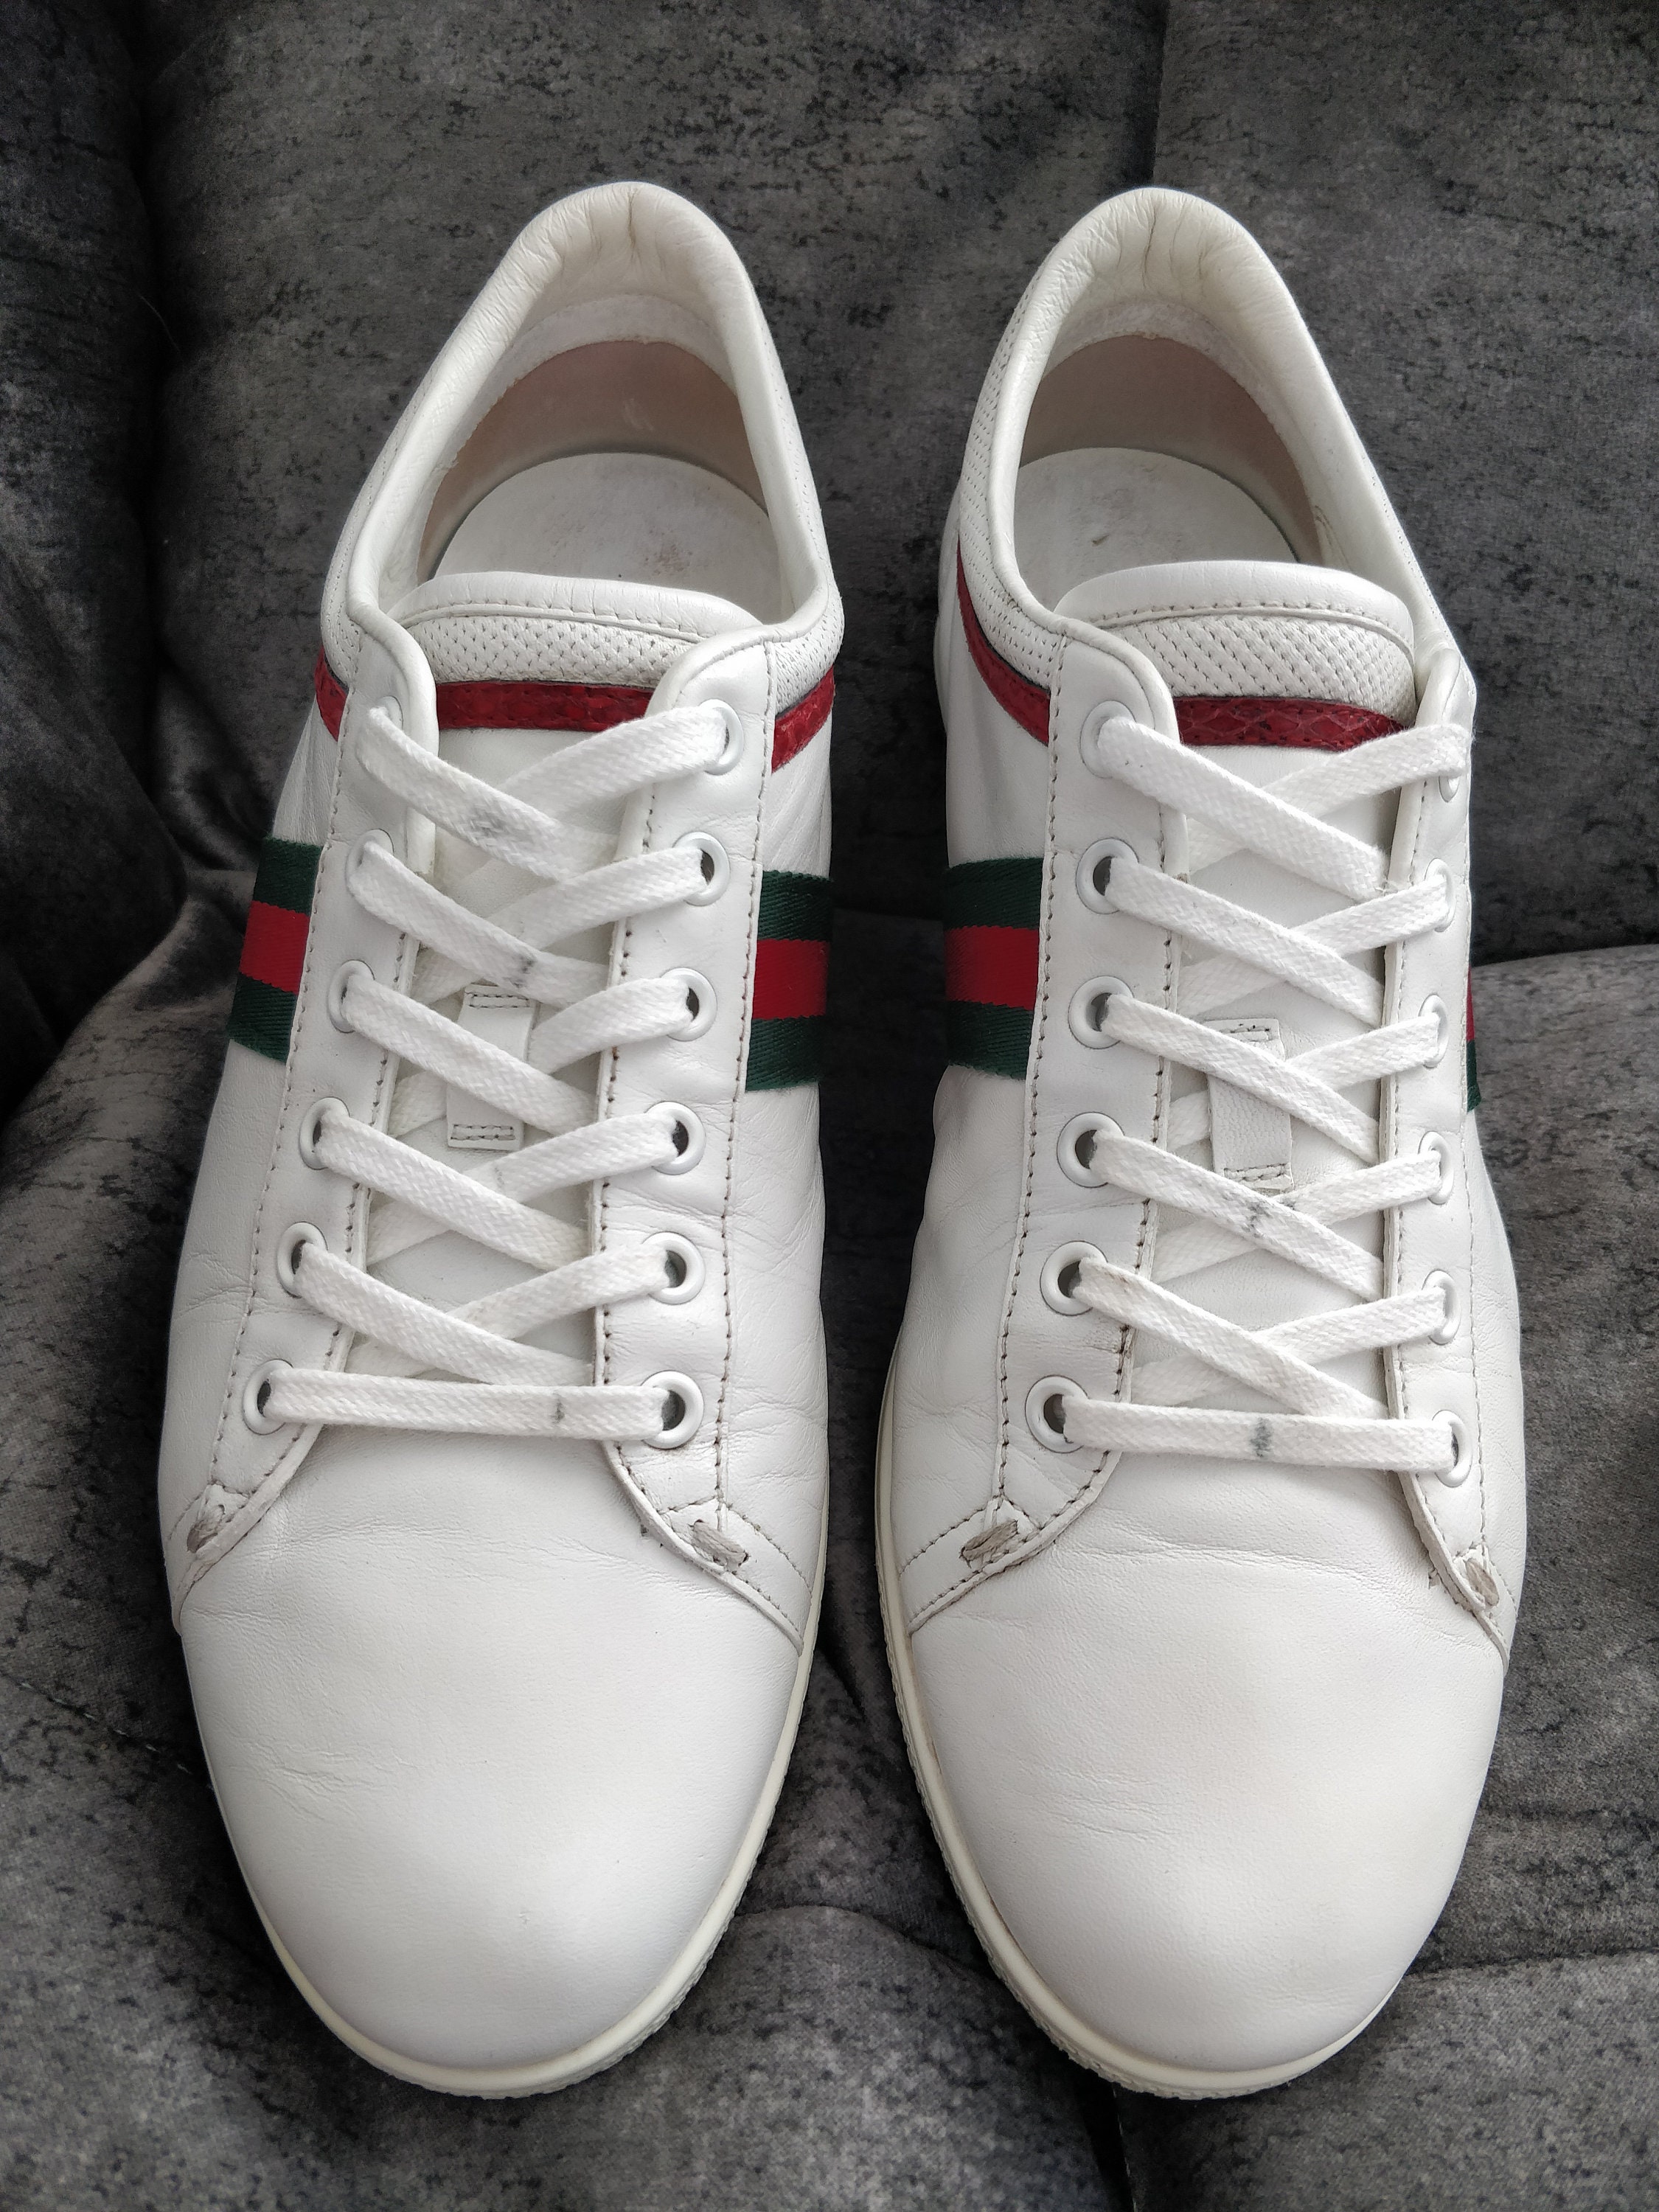 Gucci Moorea Womens White Leather Sneakers Trainers Shoes Web | Etsy